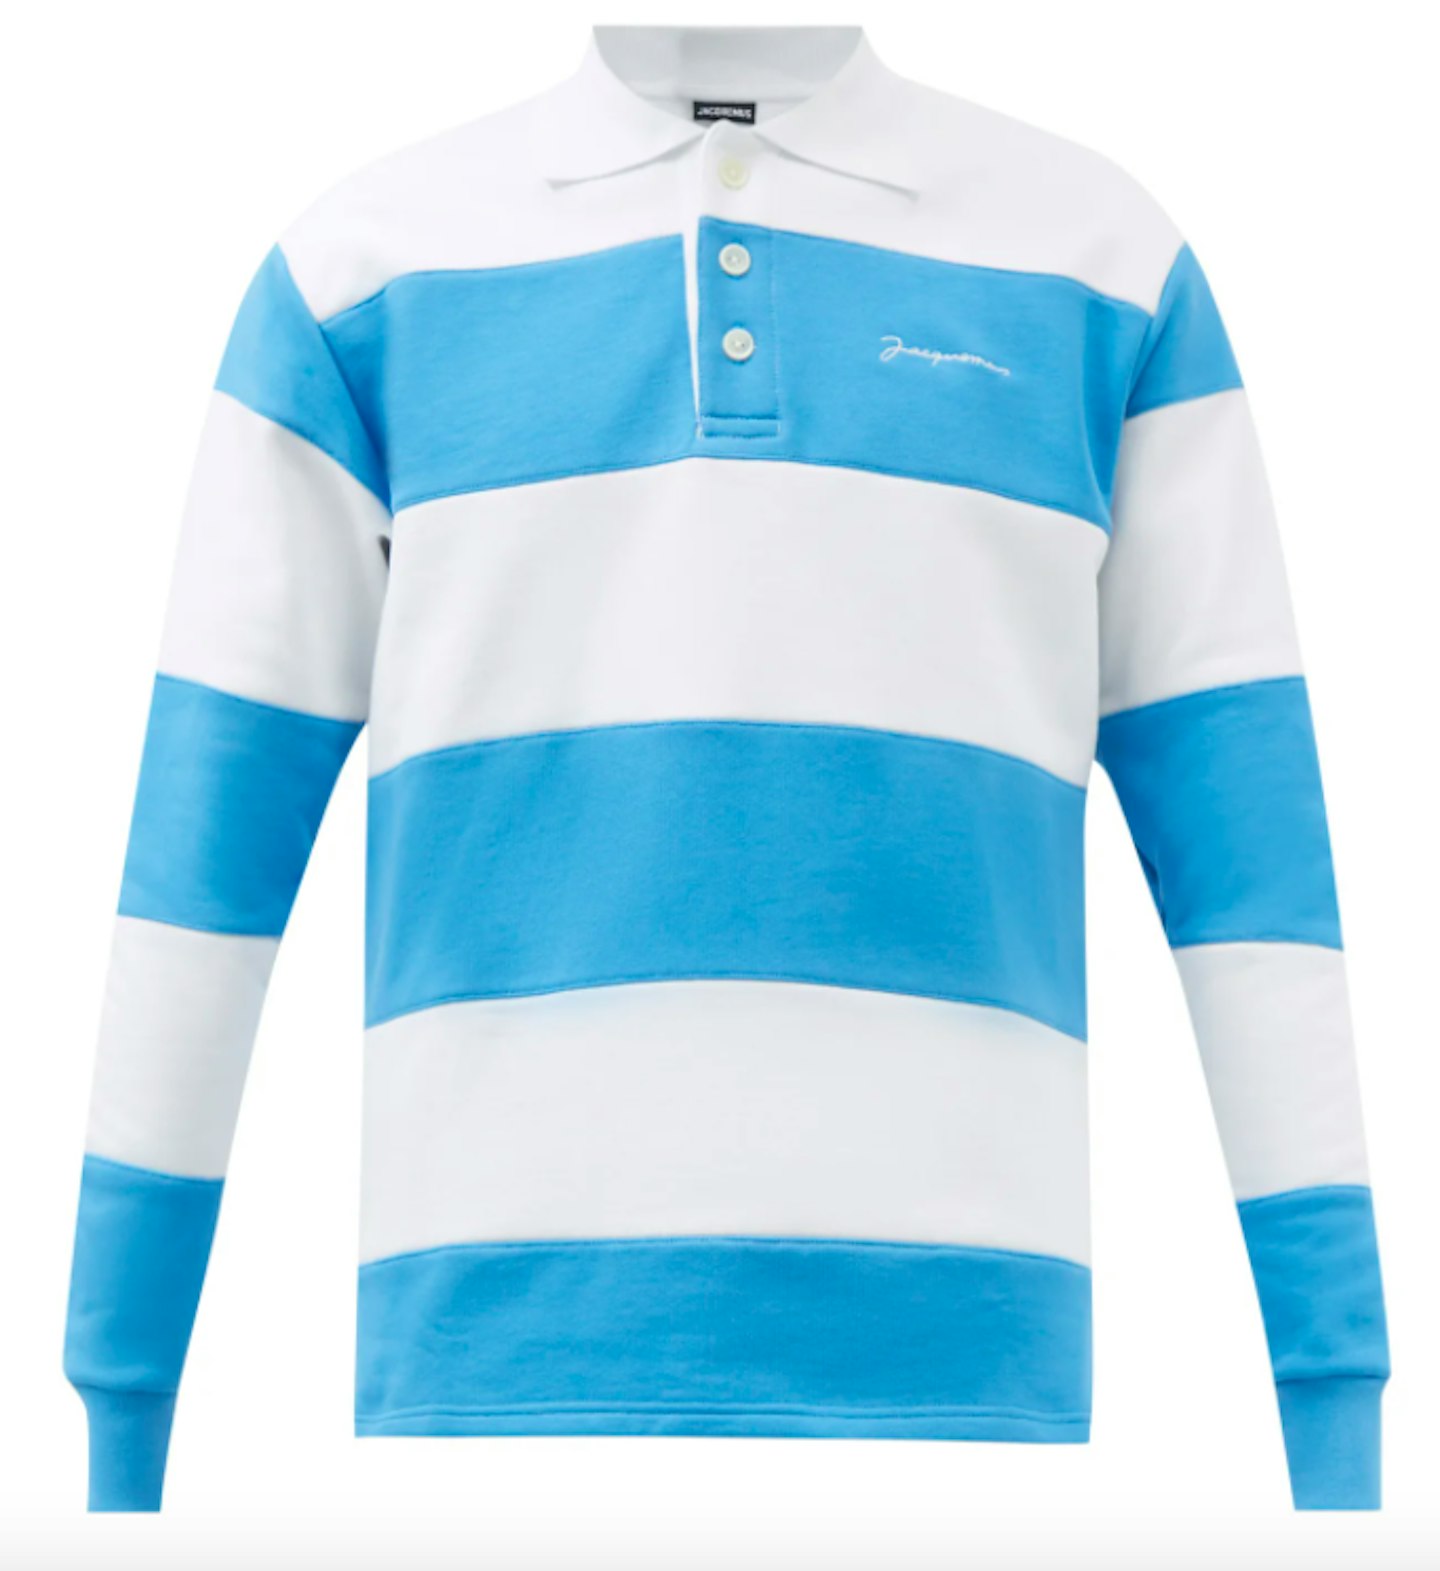 Jacquemus, Rayures Striped Cotton-Blend Rugby Shirt, £220